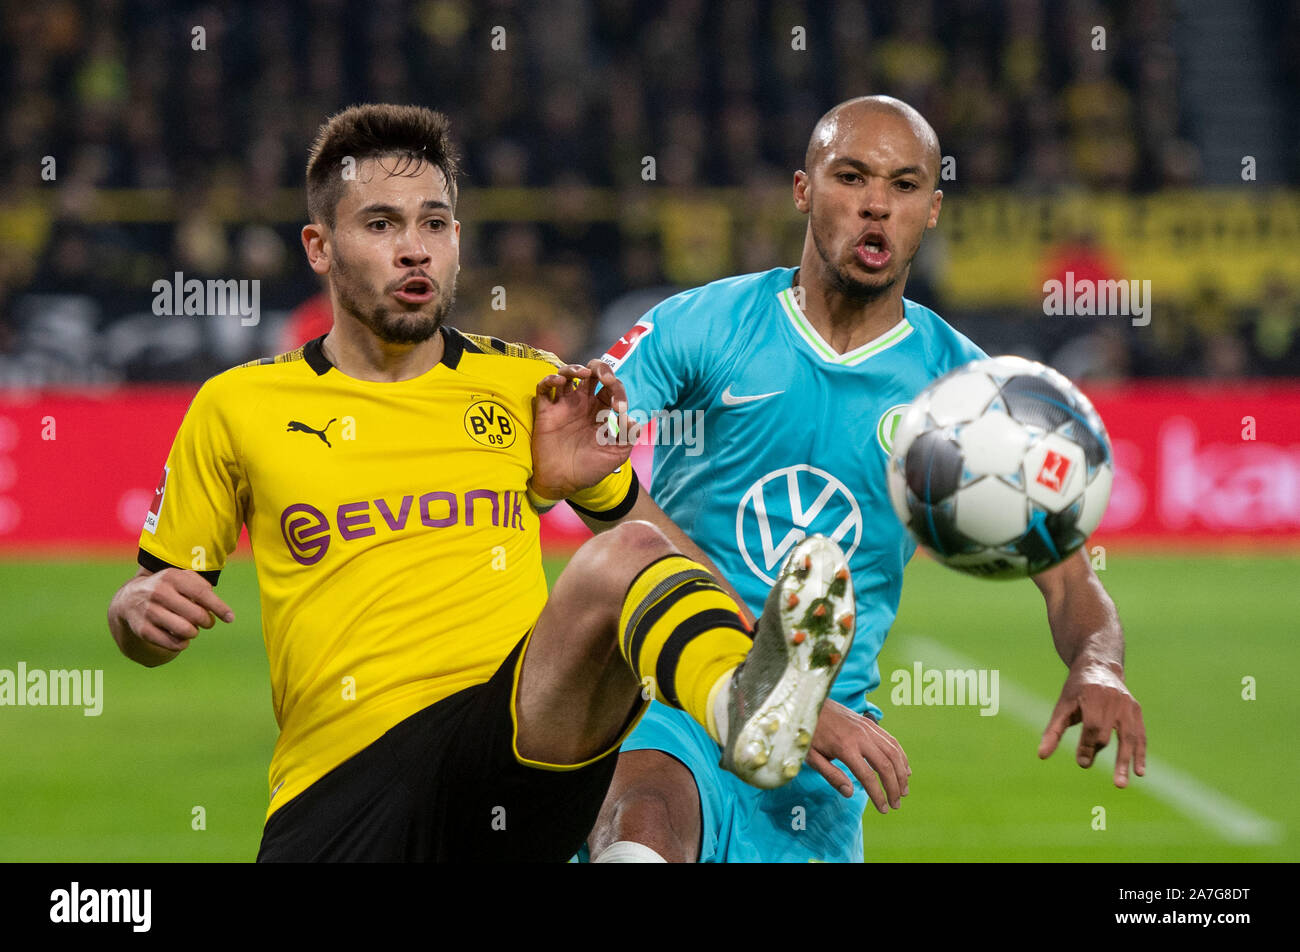 Dortmund, Germany. 02nd Nov, 2019. Soccer: Bundesliga, Borussia Dortmund - VfL Wolfsburg, 10th matchday at Signal Iduna Park. Dortmund's Raphael Guerreiro (l) and Marcel Tisserand von Wolfsburg try to get the ball. Credit: Bernd Thissen/dpa - IMPORTANT NOTE: In accordance with the requirements of the DFL Deutsche Fußball Liga or the DFB Deutscher Fußball-Bund, it is prohibited to use or have used photographs taken in the stadium and/or the match in the form of sequence images and/or video-like photo sequences./dpa/Alamy Live News Stock Photo